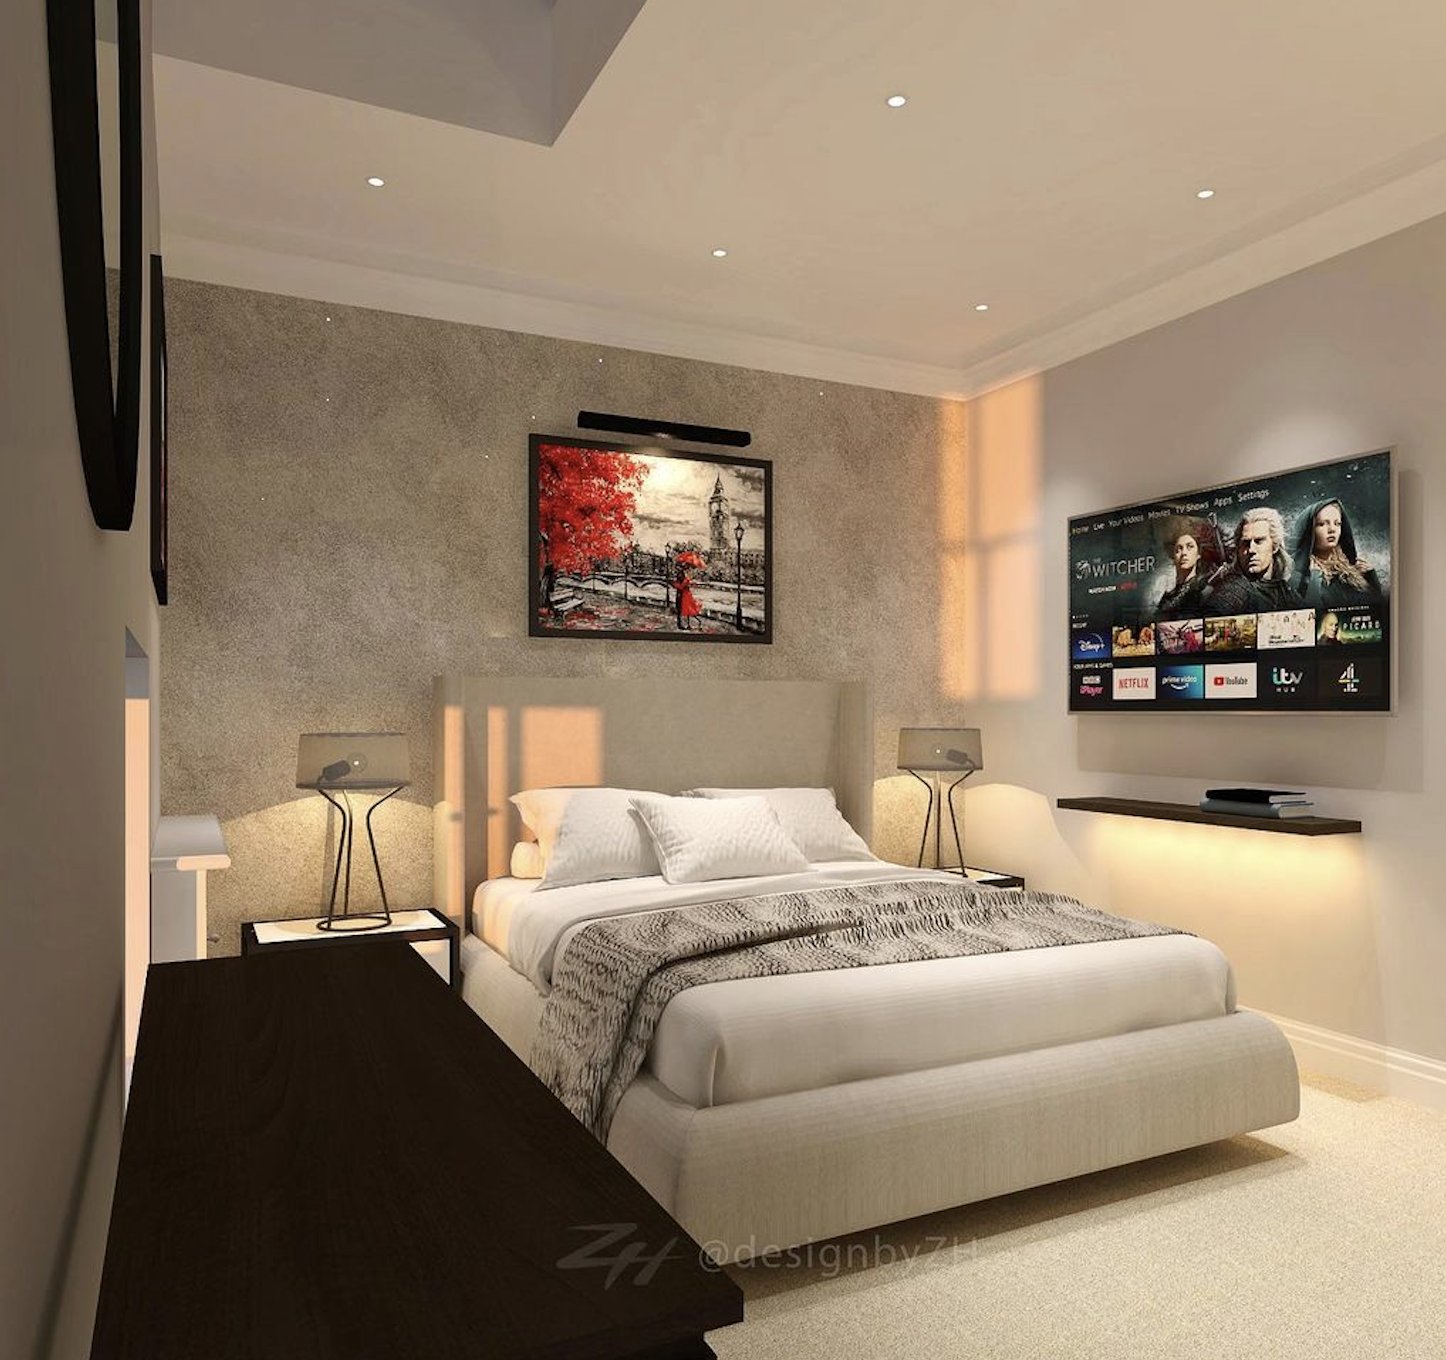 Contemporary Edge in Bedroom Ambiance